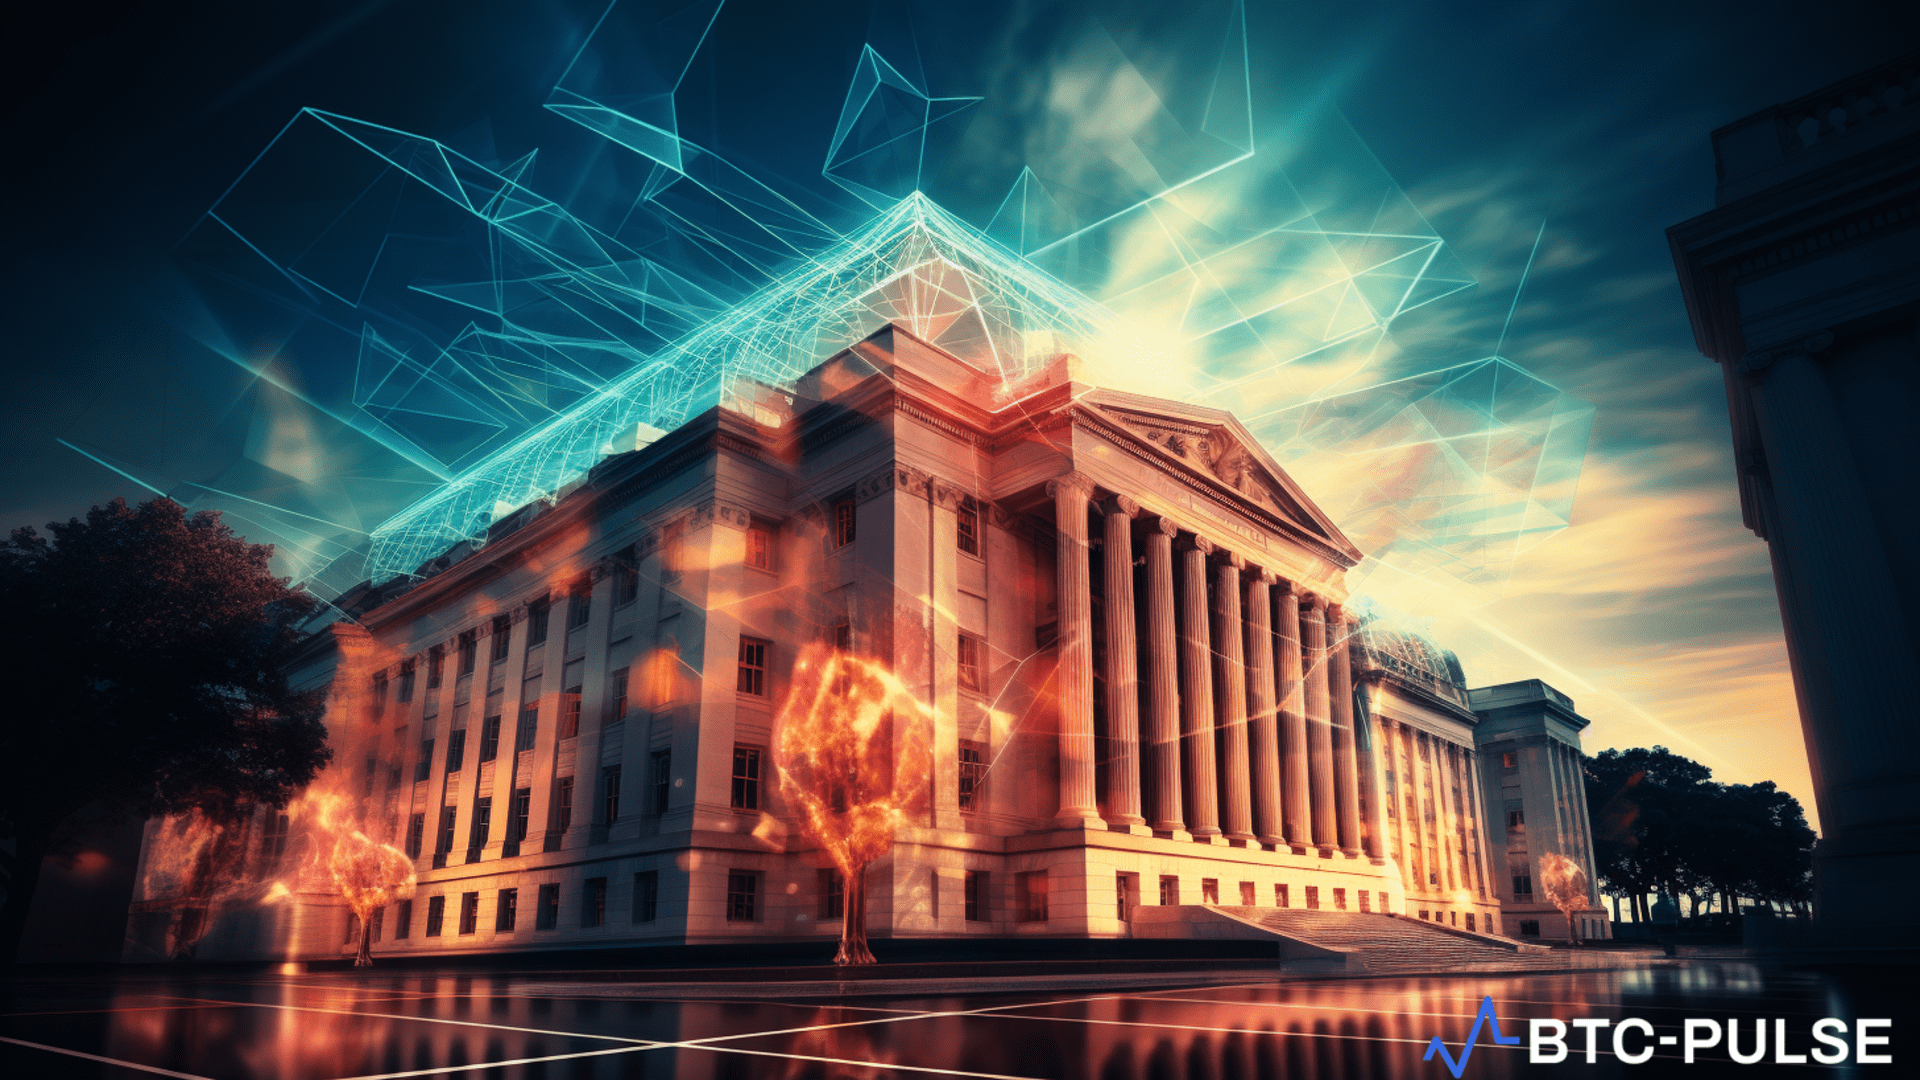 U.S. Department of Justice examines Block Inc's crypto transactions for compliance with regulations and sanctions